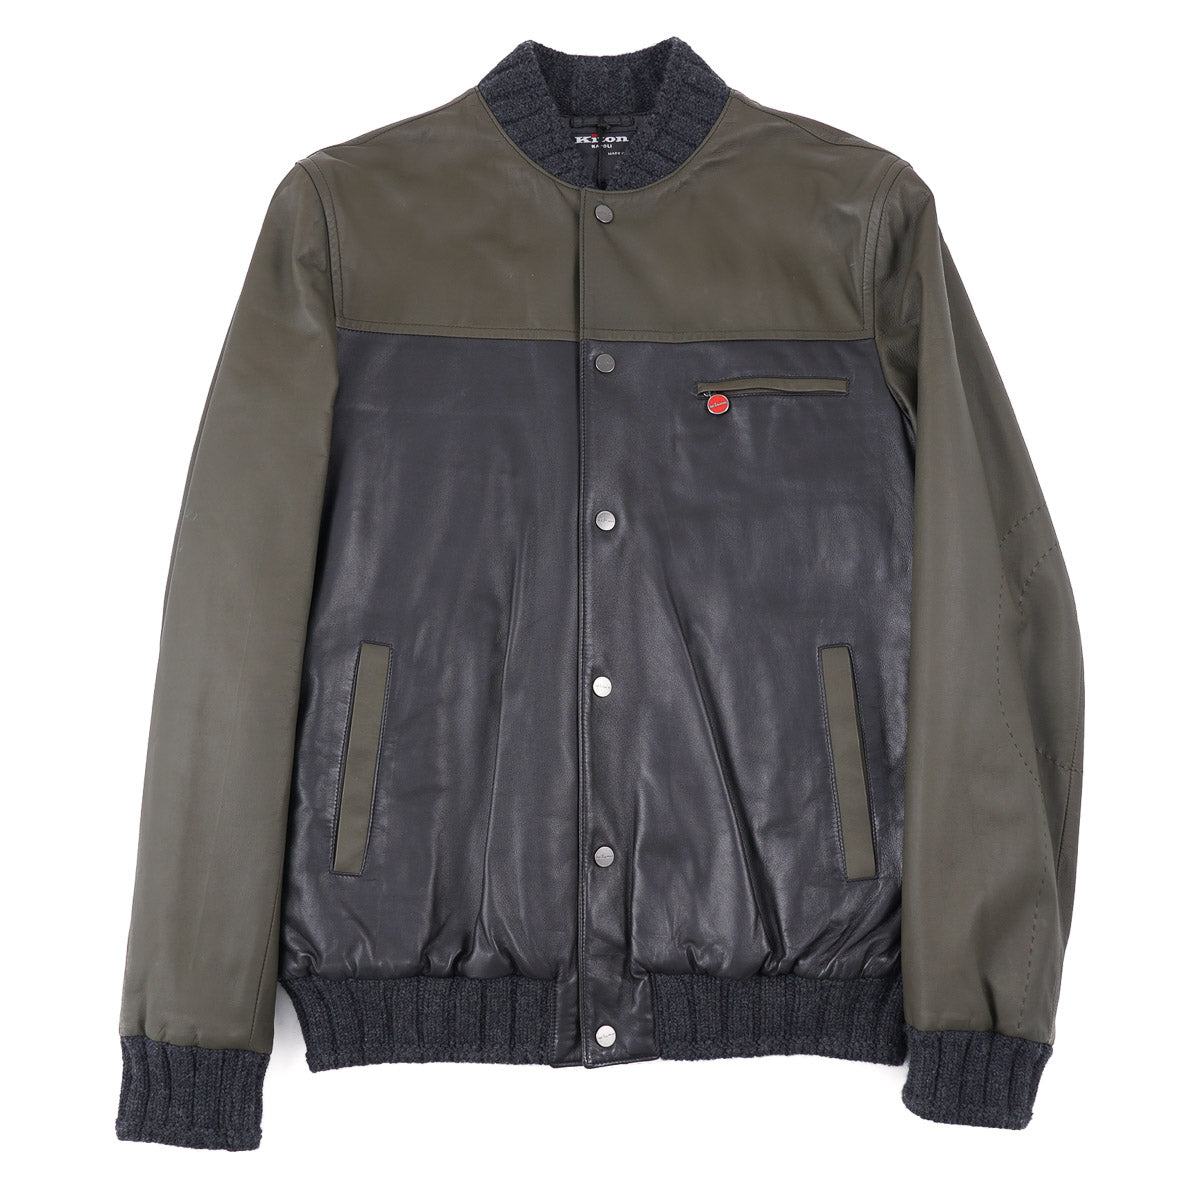 Kiton Lambskin Leather Jacket with Down Fill - Top Shelf Apparel